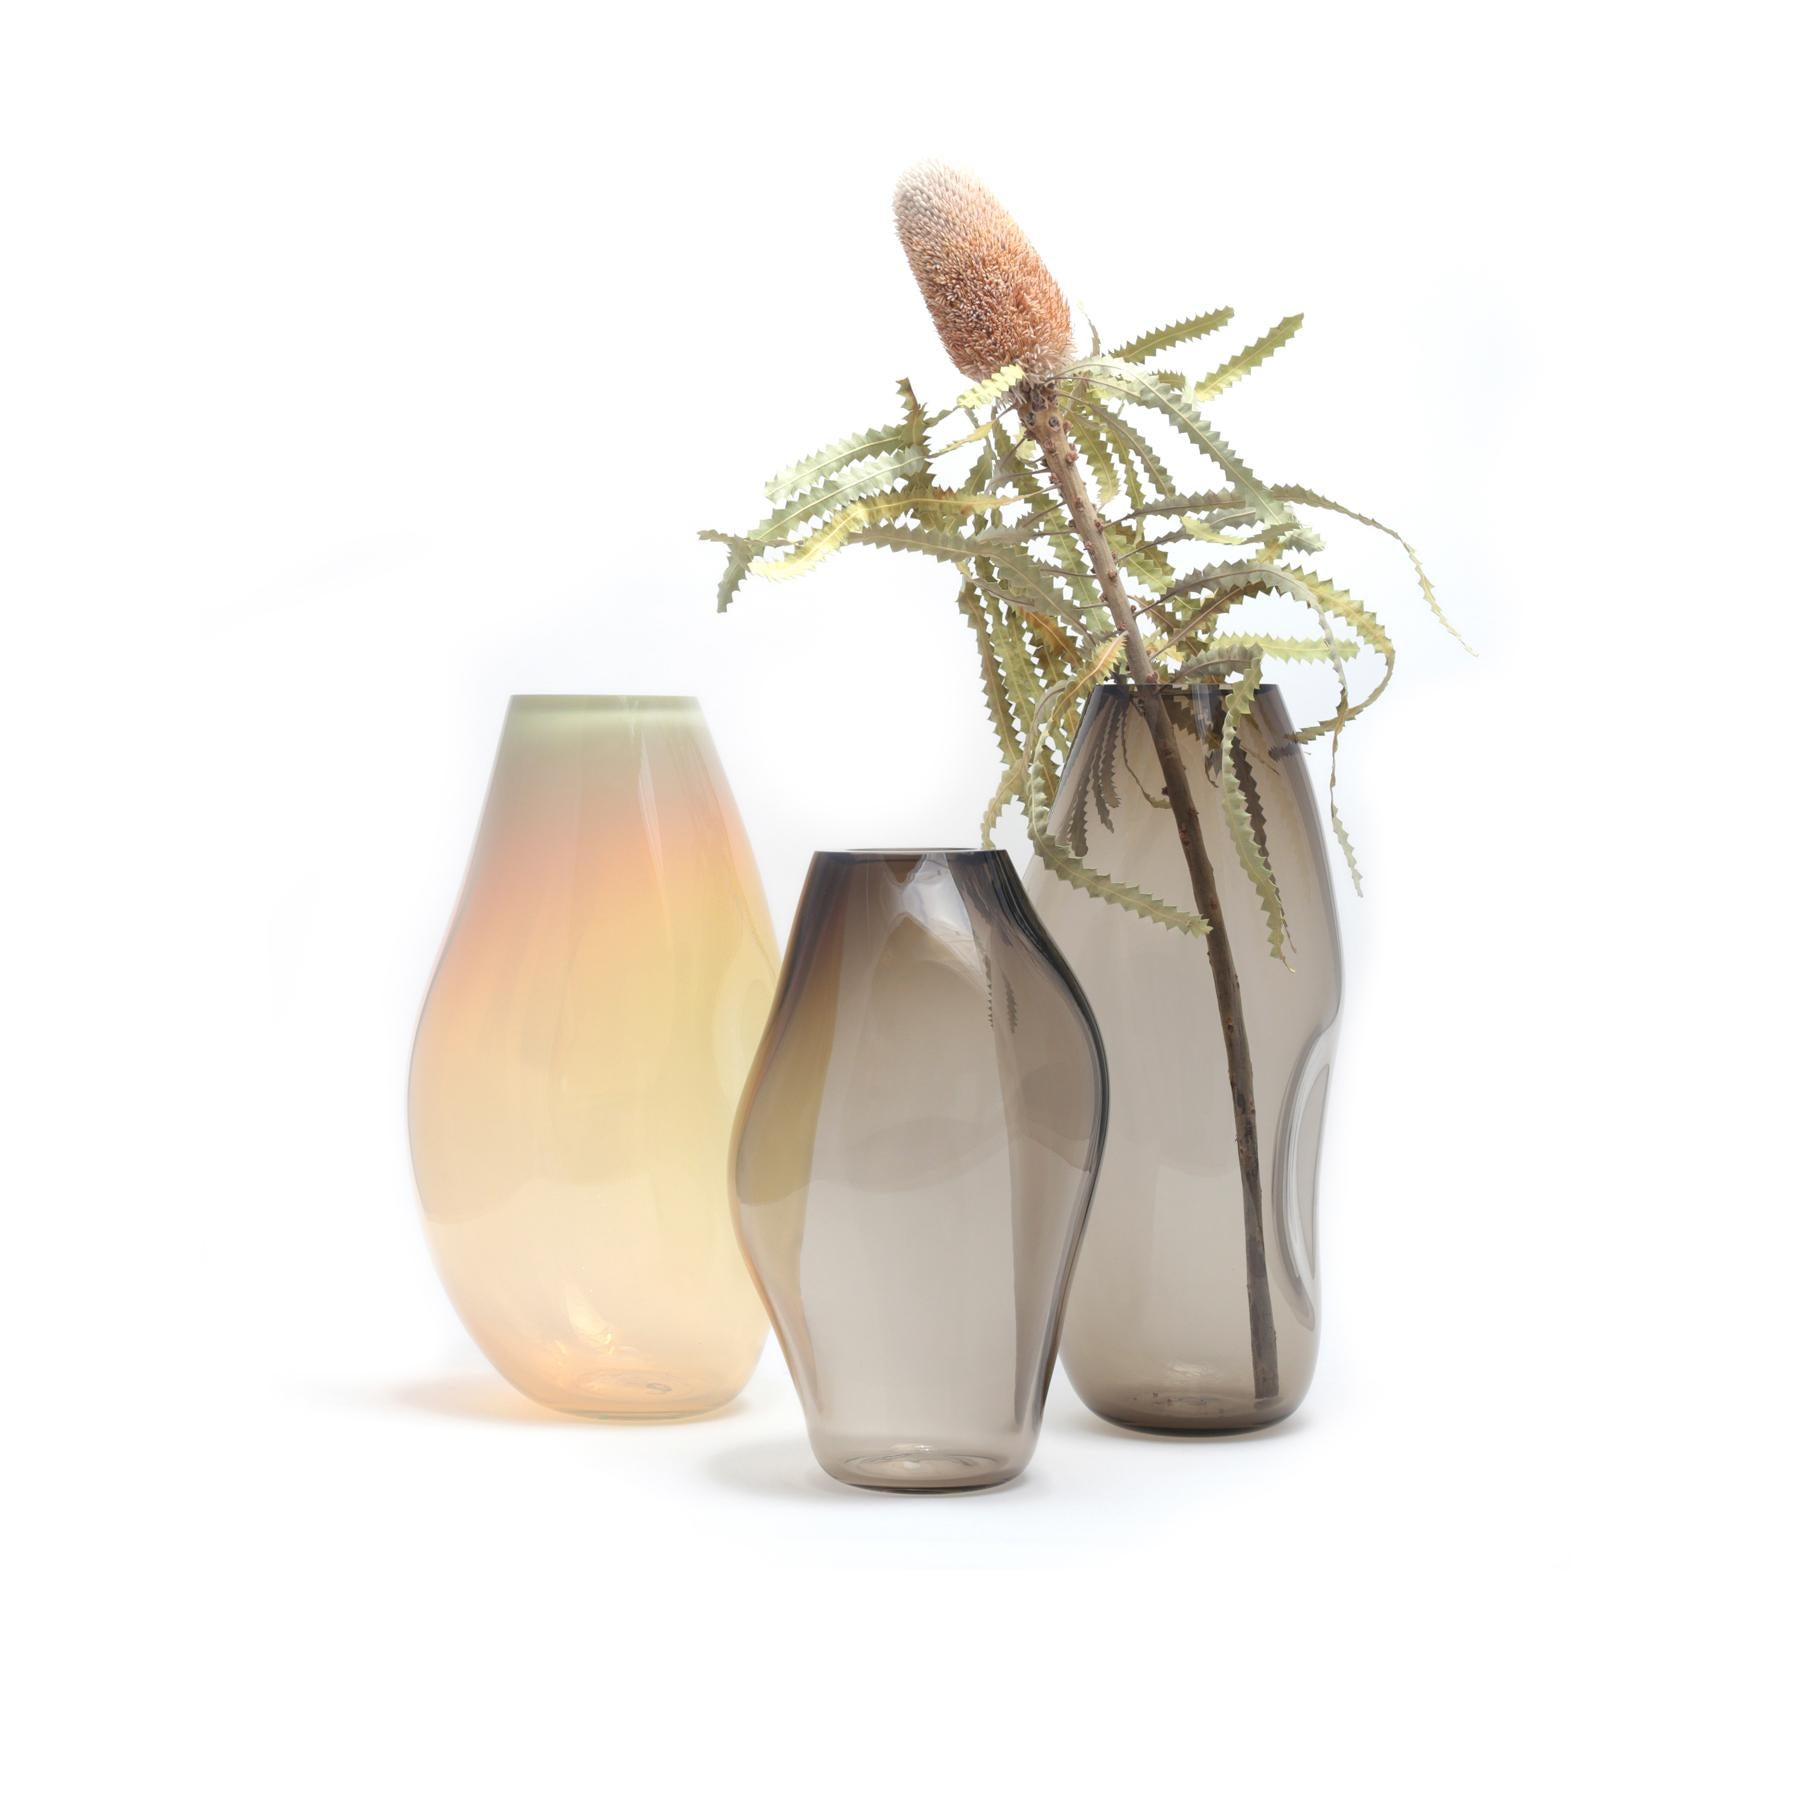 Set of 3 Supernova IV L/M/ L vases by Eloa
No UL listed 
Material: glass
Dimensions: D15 x W17 x H41 cm / D 15 x W 17 x H 36 cm.
Also available in different colours and dimensions.

Supernova is a collection of vases and bowls that, though they